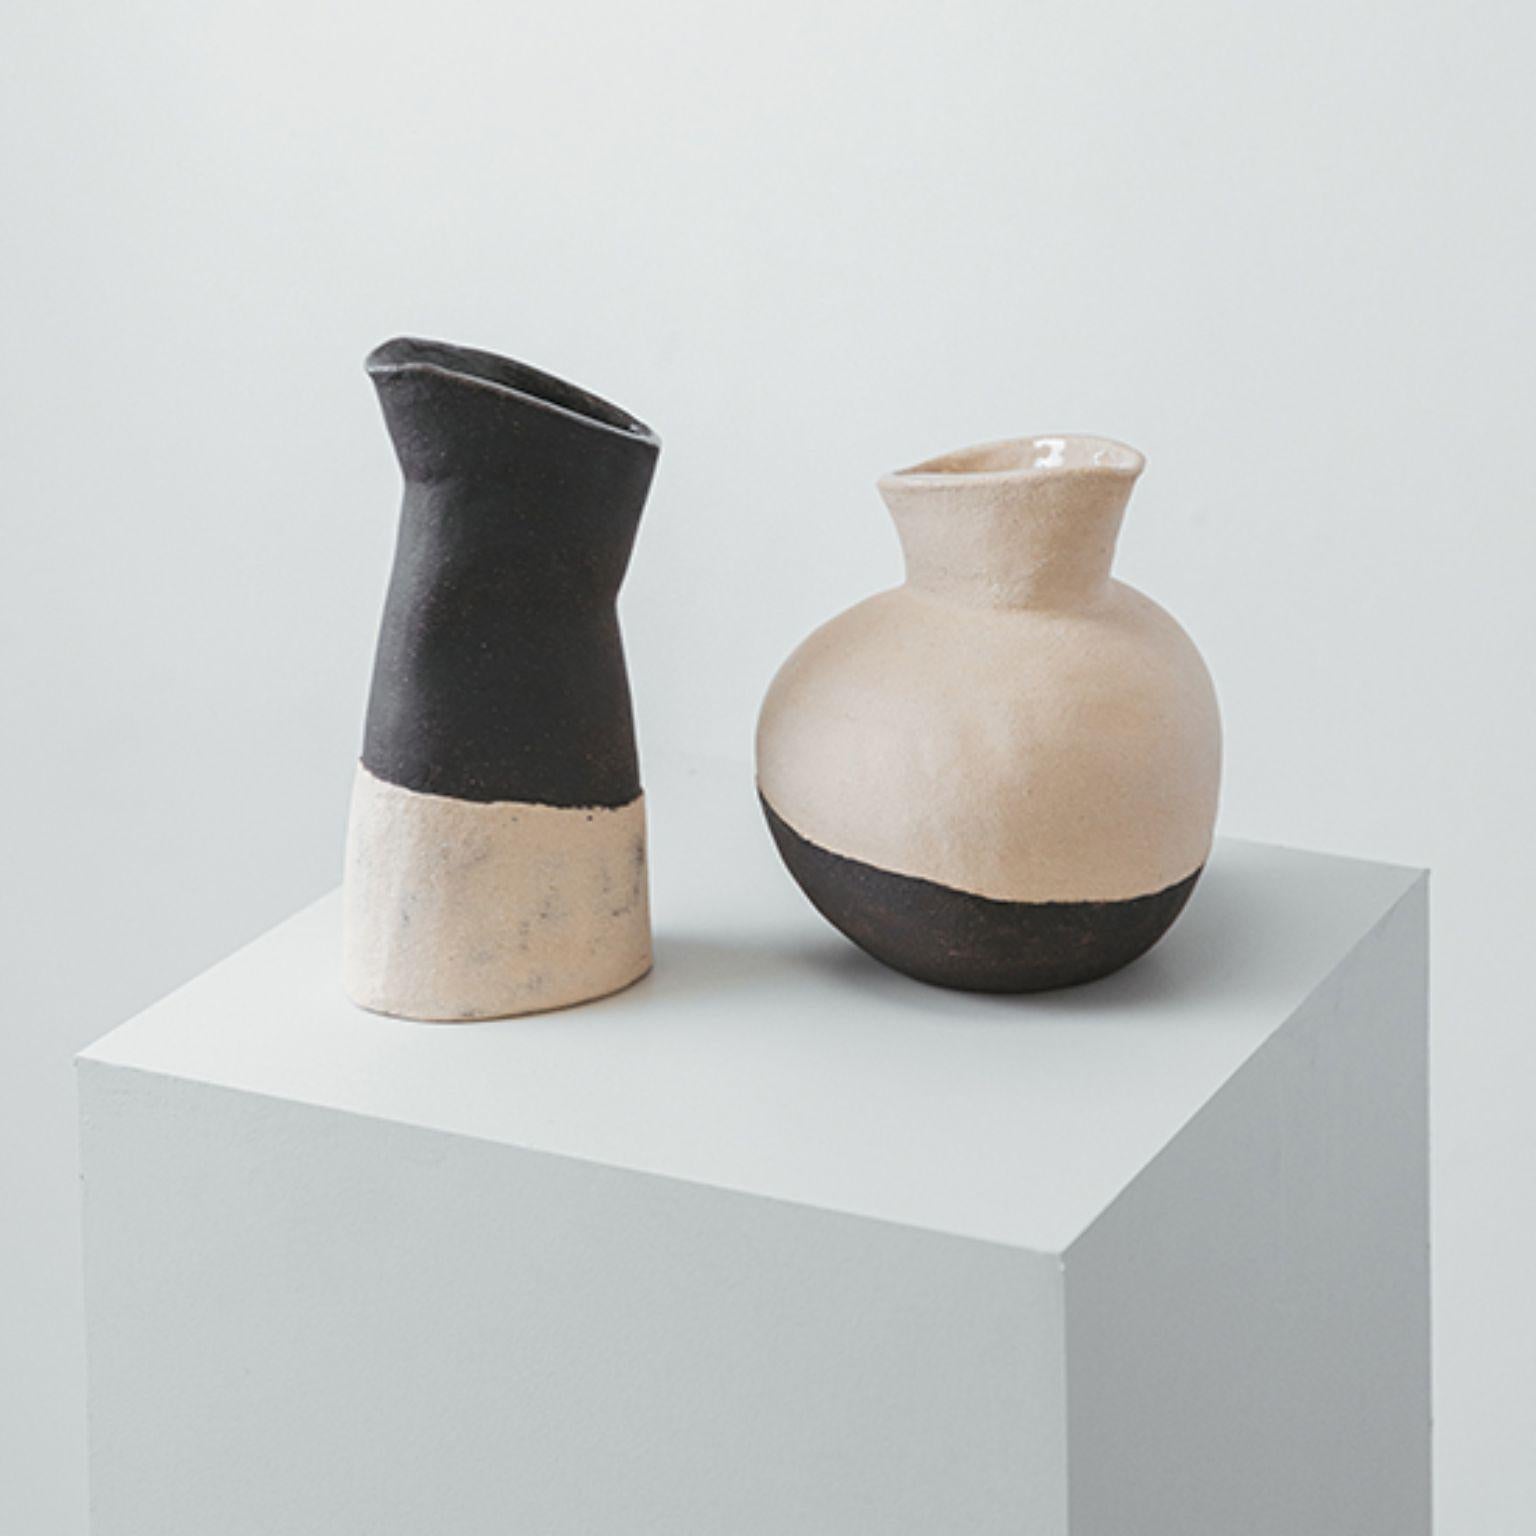 Set of 2 Deméter and Perséfone Wine and Water Jars by Cuit Studio
One of a Kind.
Dimensions: Deméter: Ø 16 x H 22 cm.
Perséfone: D 8 x W 12 x H 24 cm.
Materials: Natural and black stoneware.

Sculptural water & wine jar set. Mix of natural and black